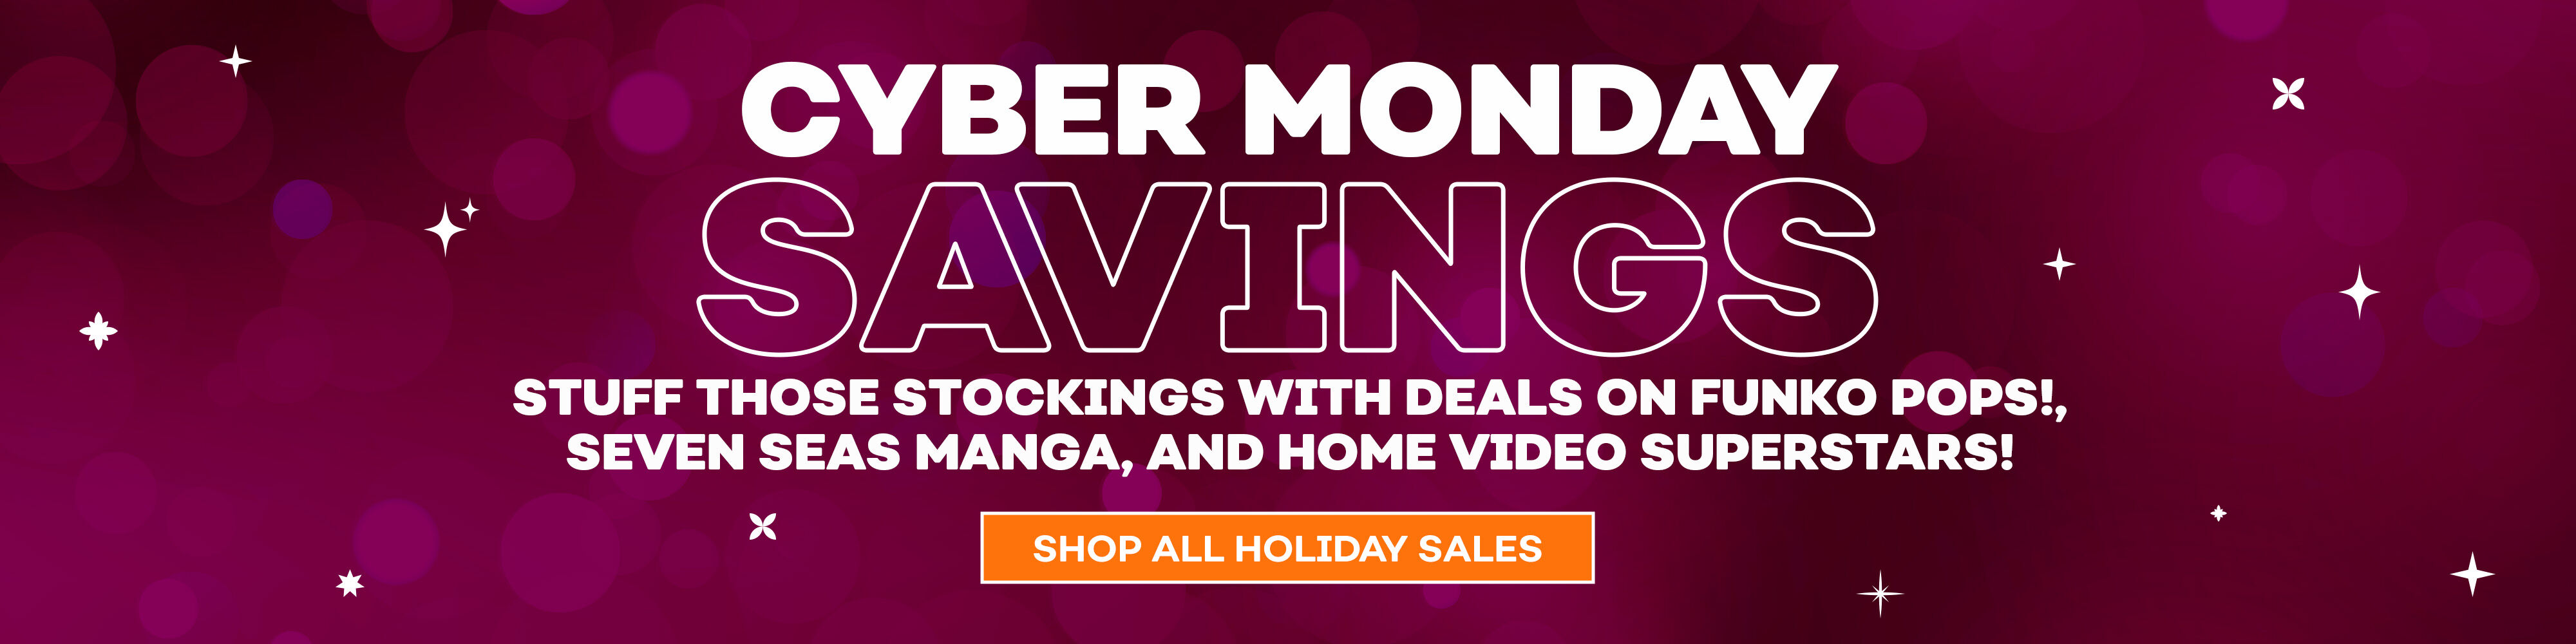  Cyber Monday Savings with Deals on Funko POPs!, Seven Seas Manga, and Home Video